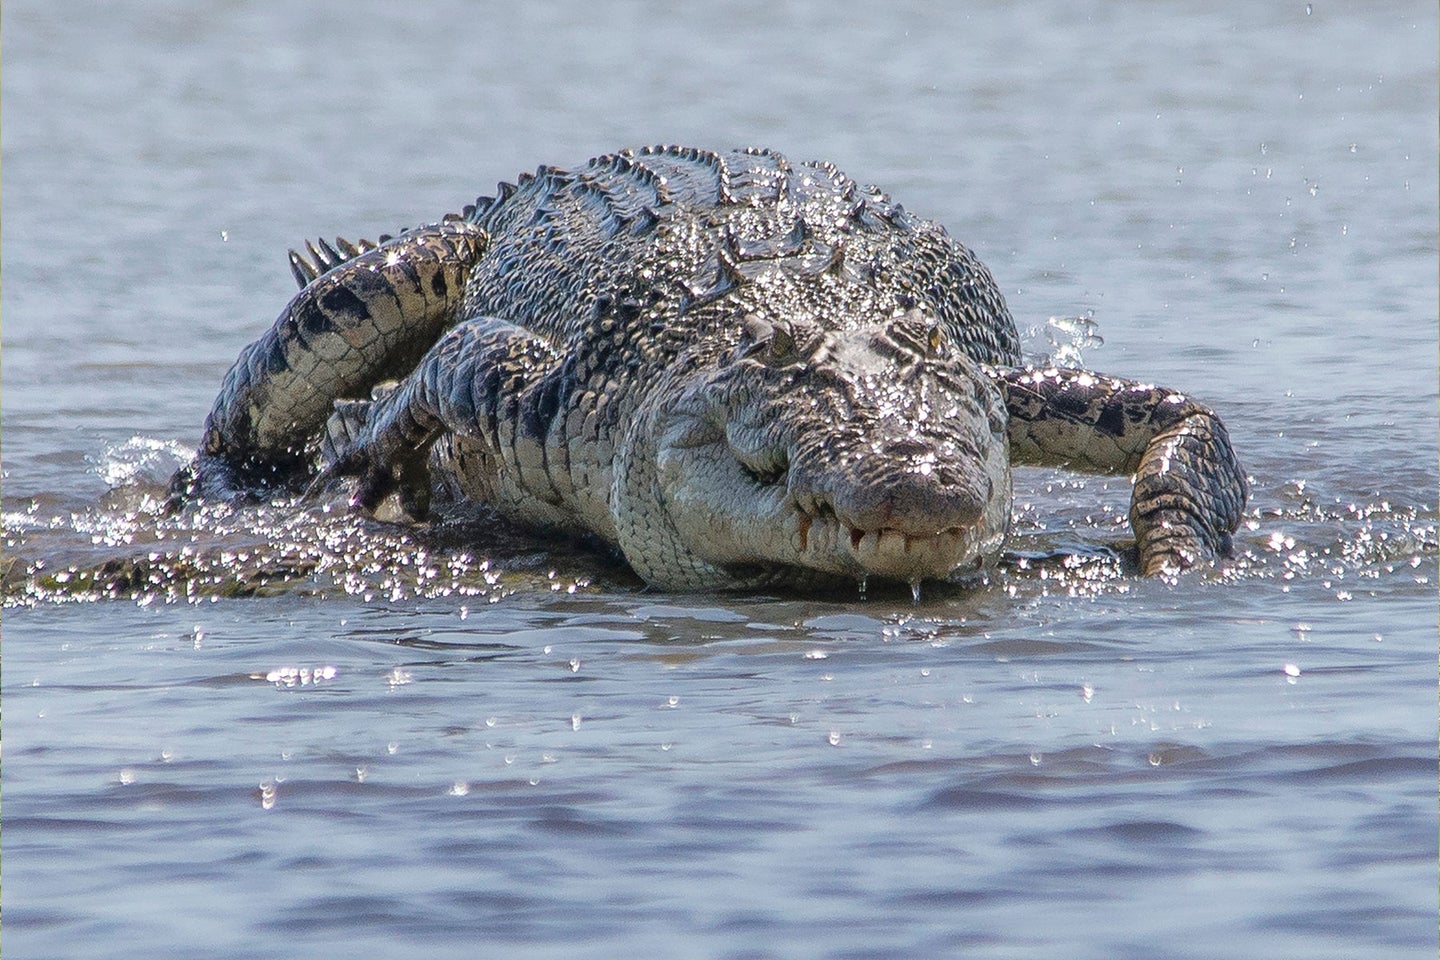 Queensland, Australia is home to approximately 30,000 saltwater crocodiles. 